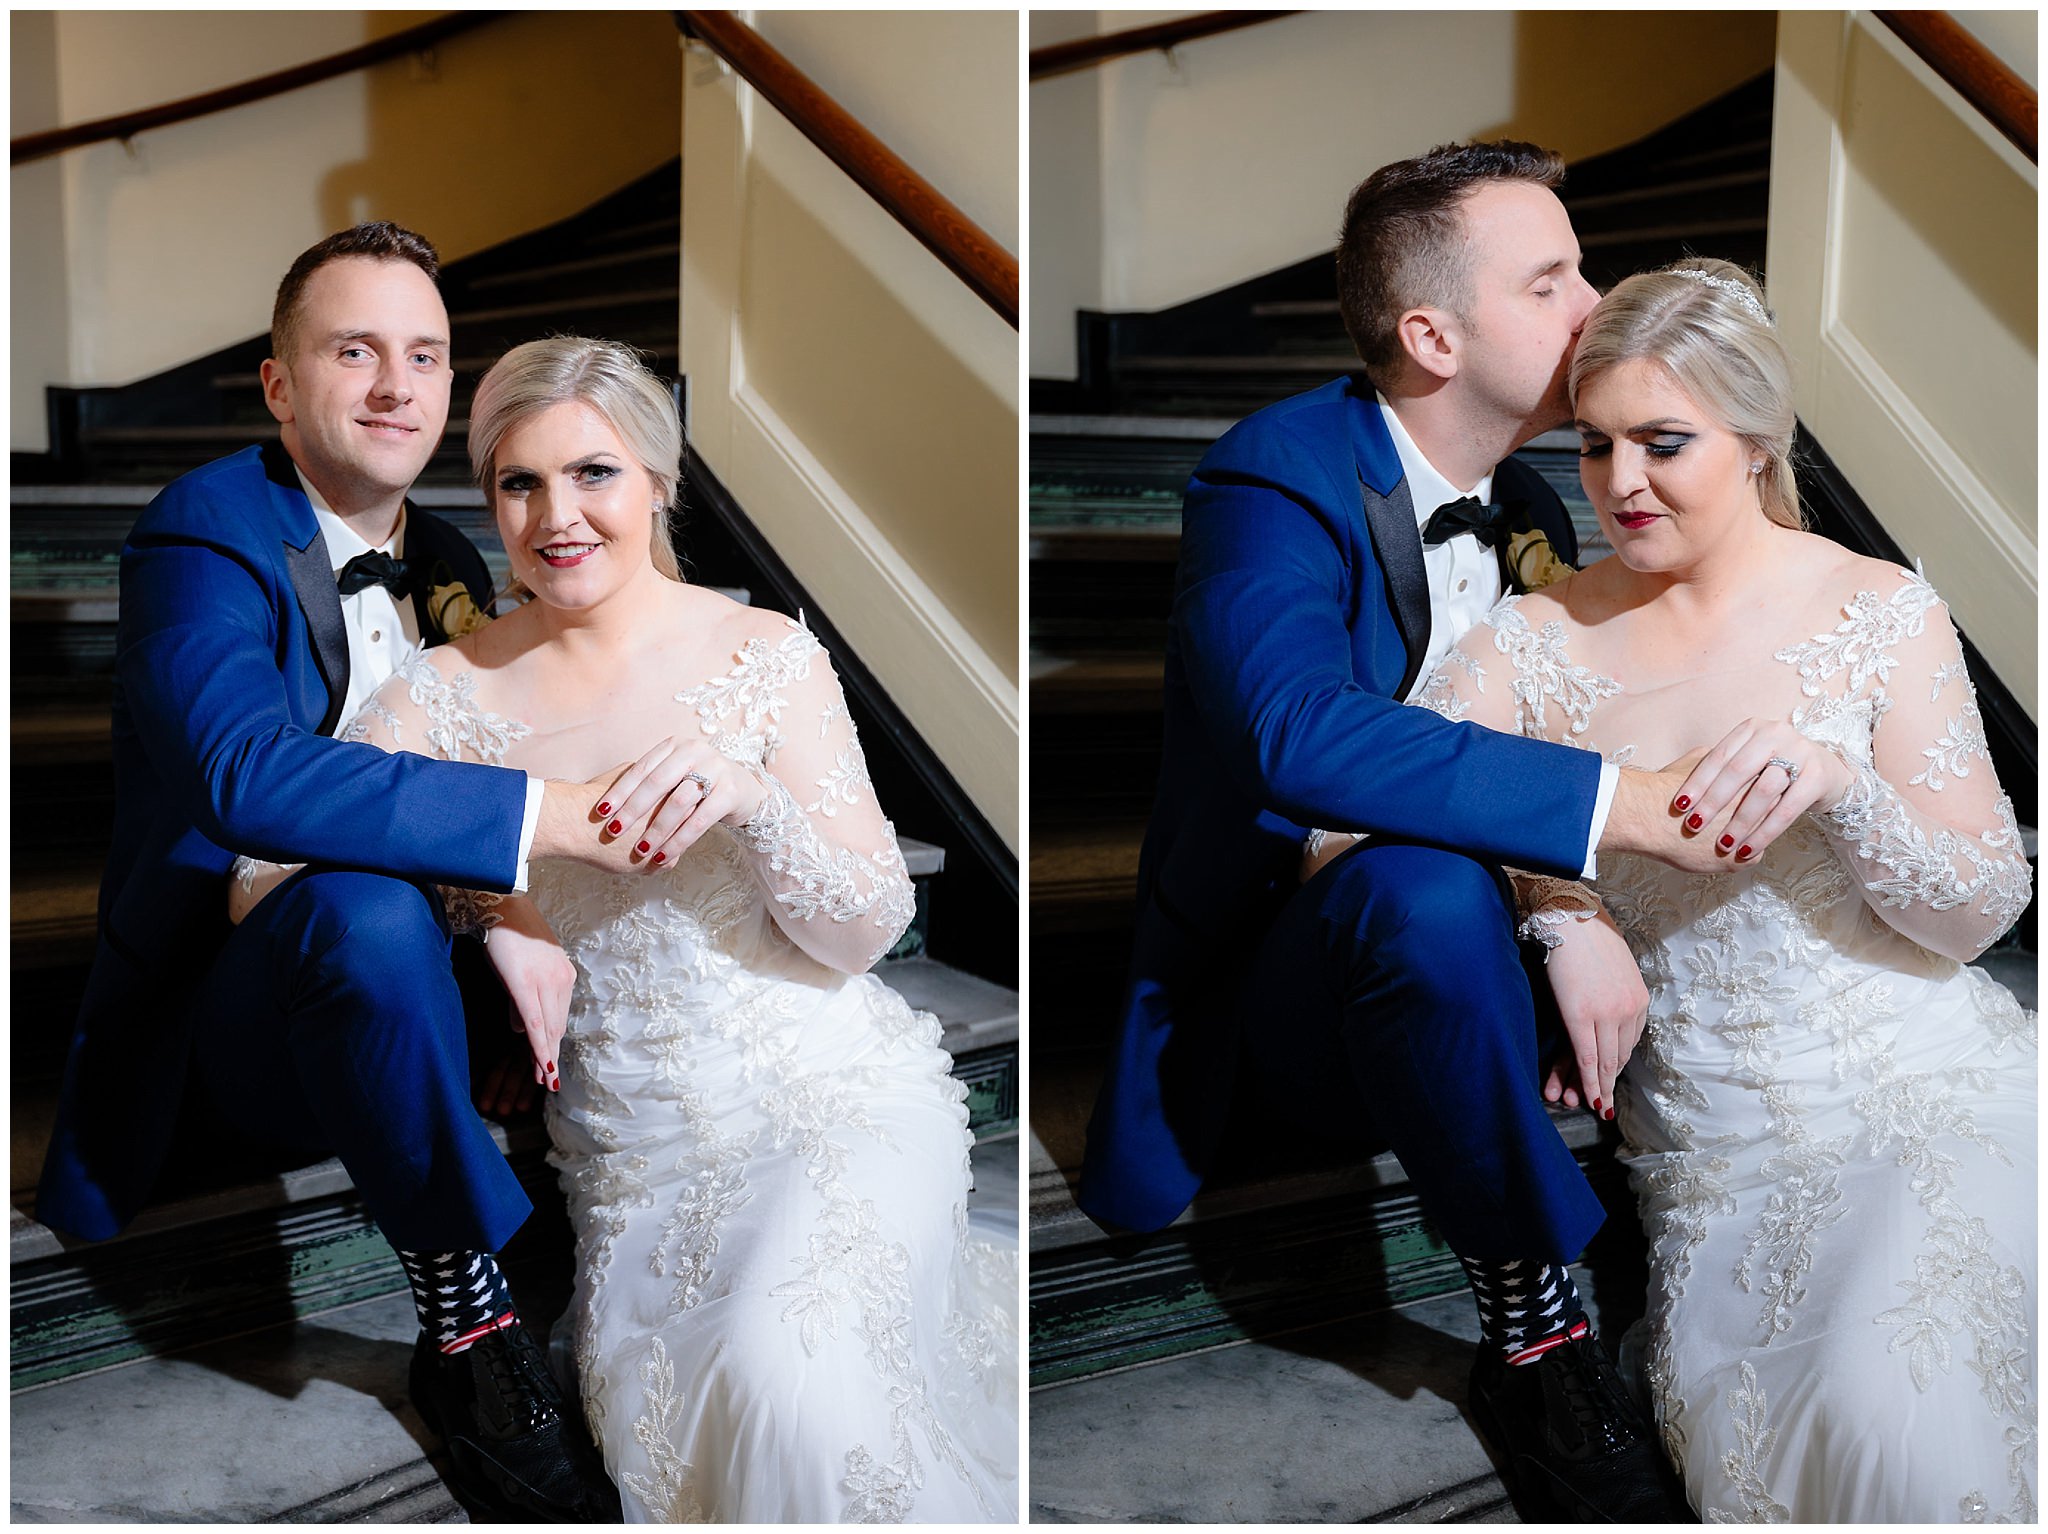 Wedding portraits in the stairwell at Soldiers & Sailors Memorial Hall